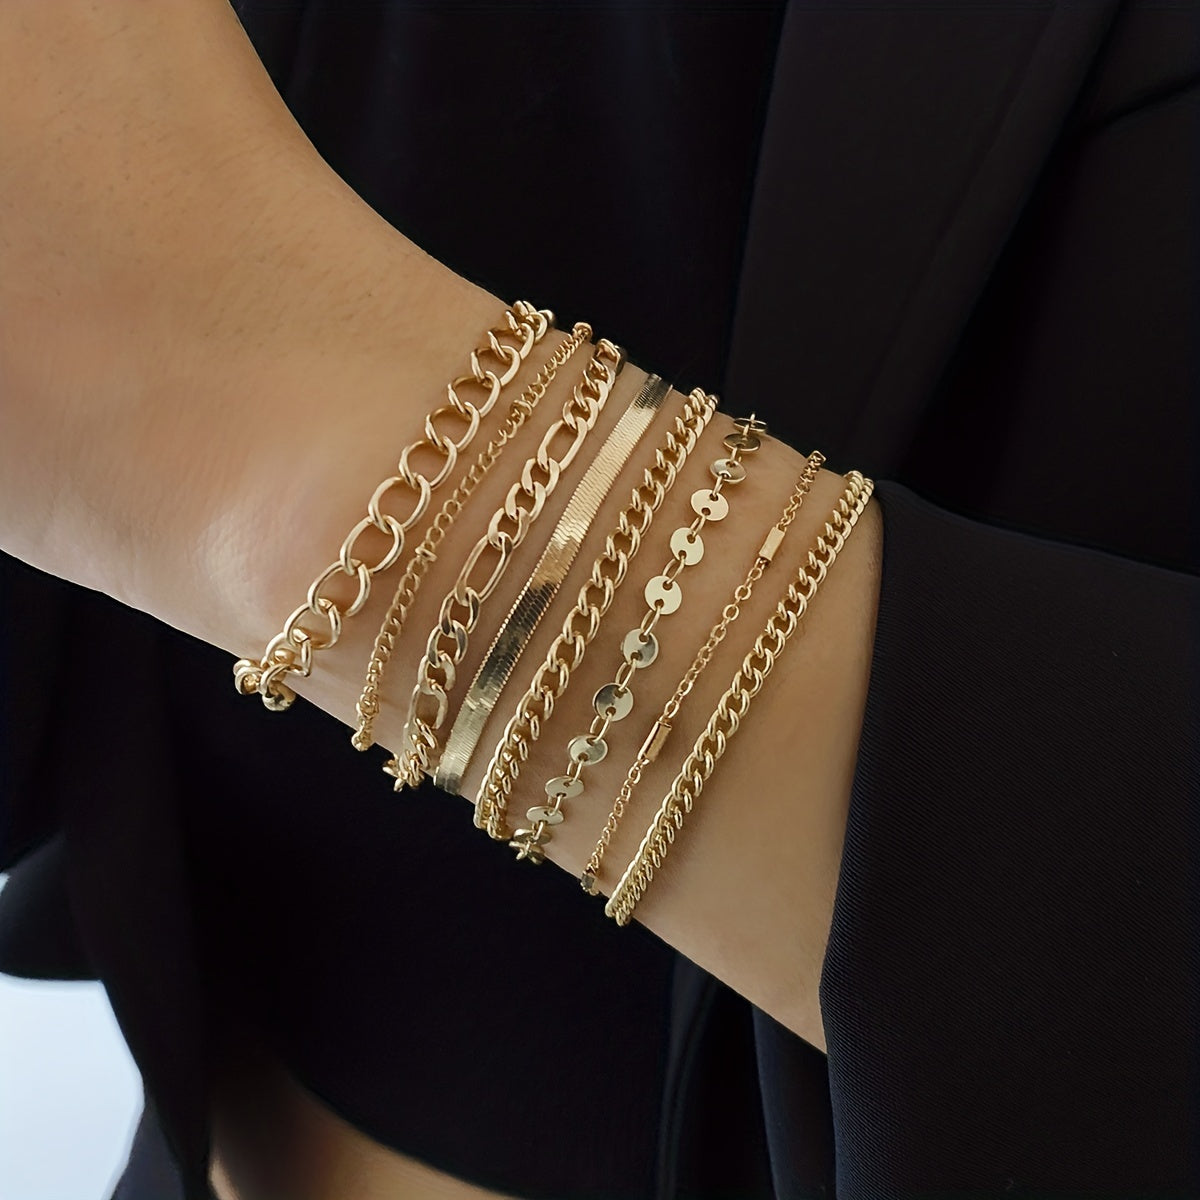 Complete Your Look with our 8 Piece Geometric Chain Bracelet Set - Adjustable Alloy Metal Jewelry Accessories